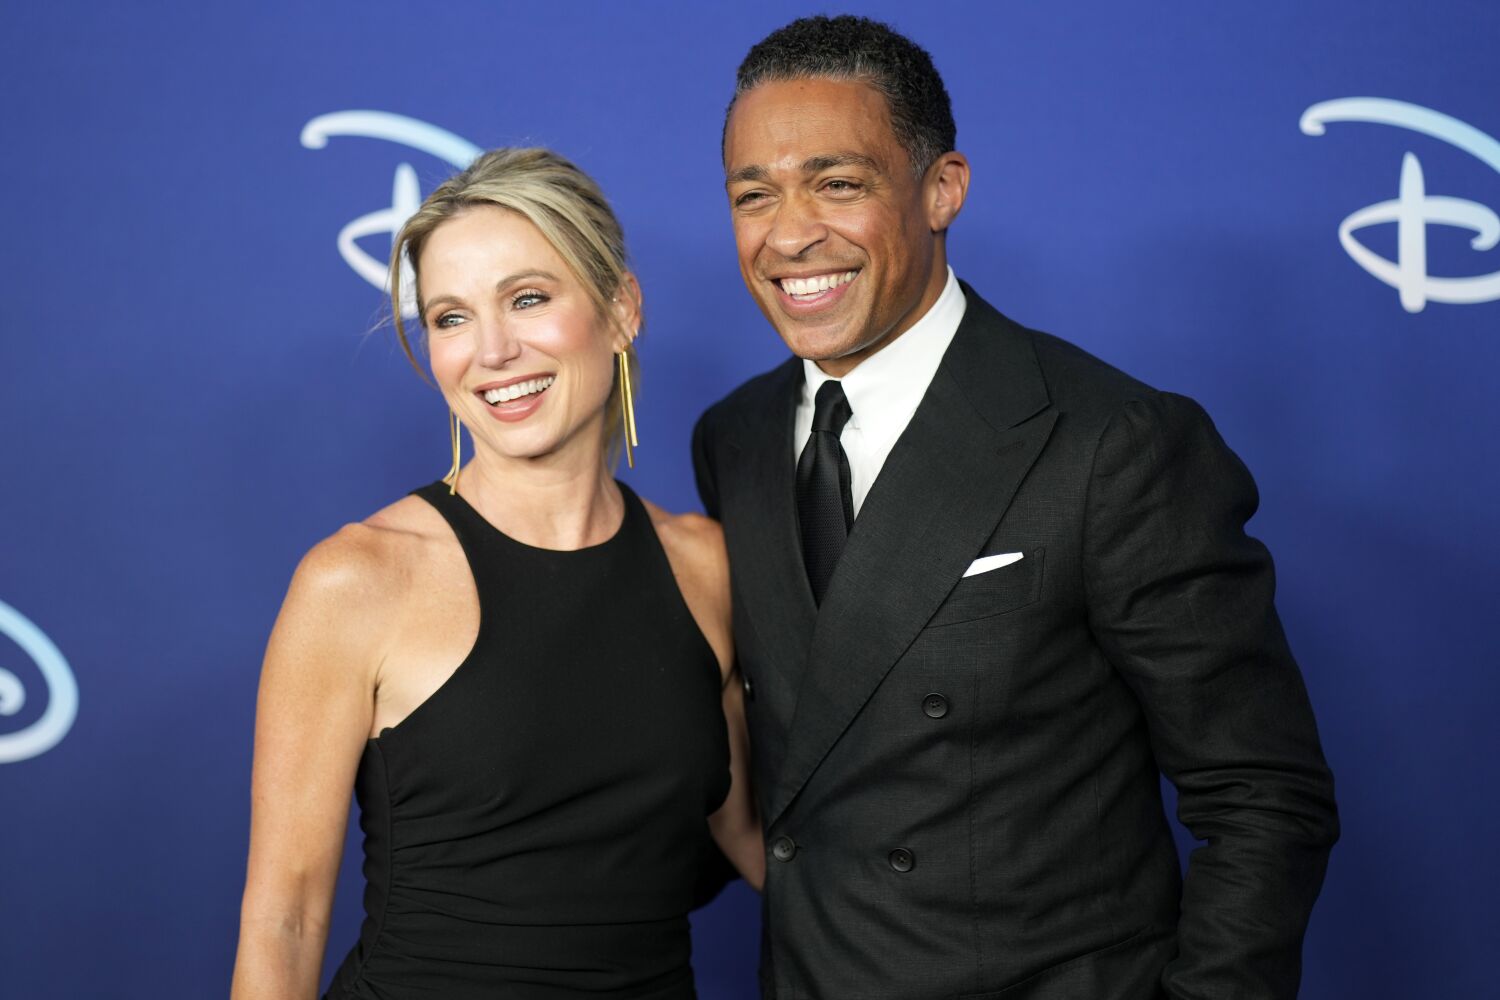 Amy Robach and T.J. Holmes run half-marathon together after 'GMA' scandal